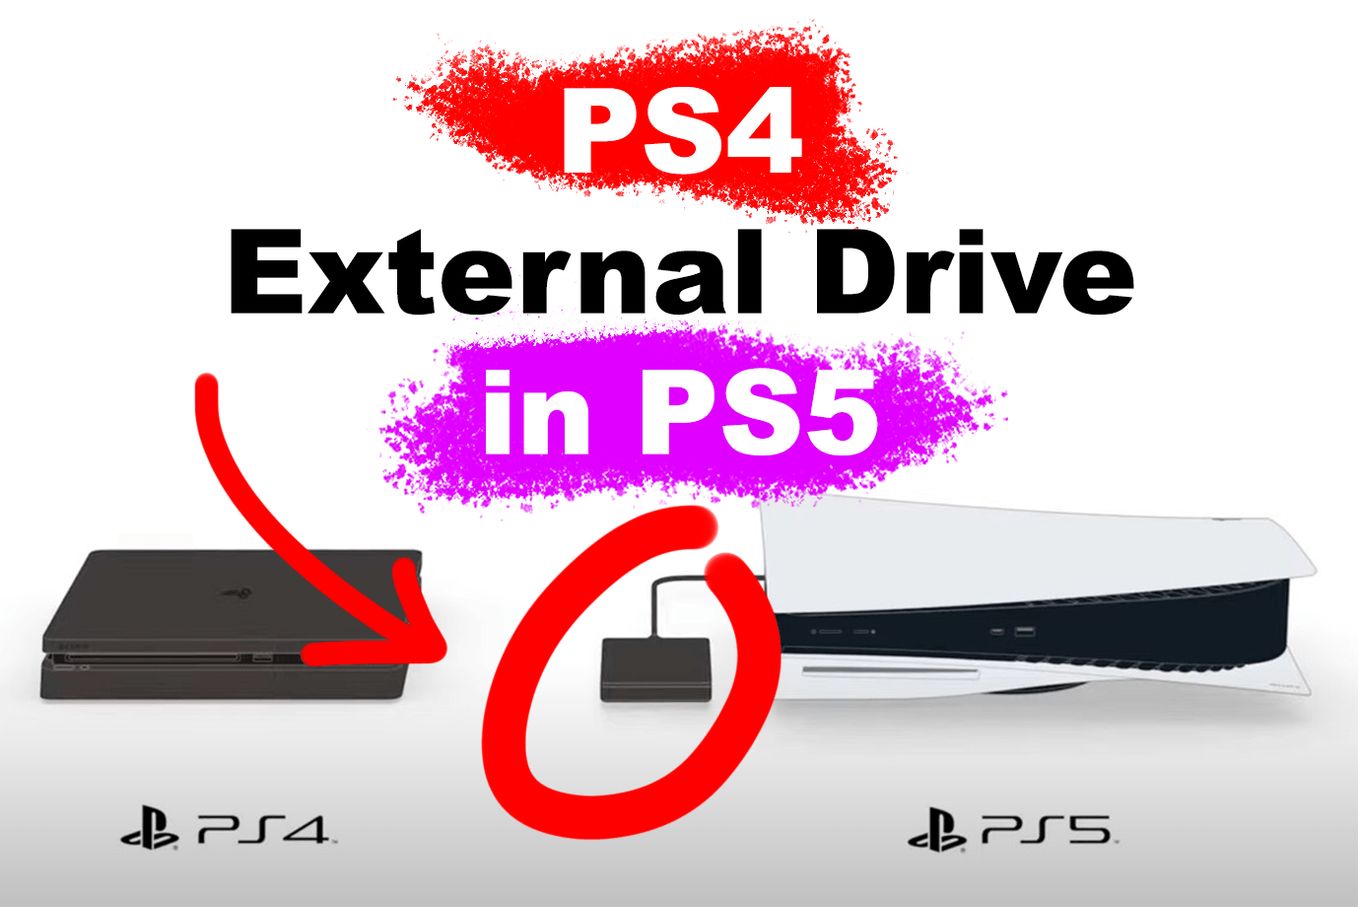 PS4 External Drive to PS5 Console